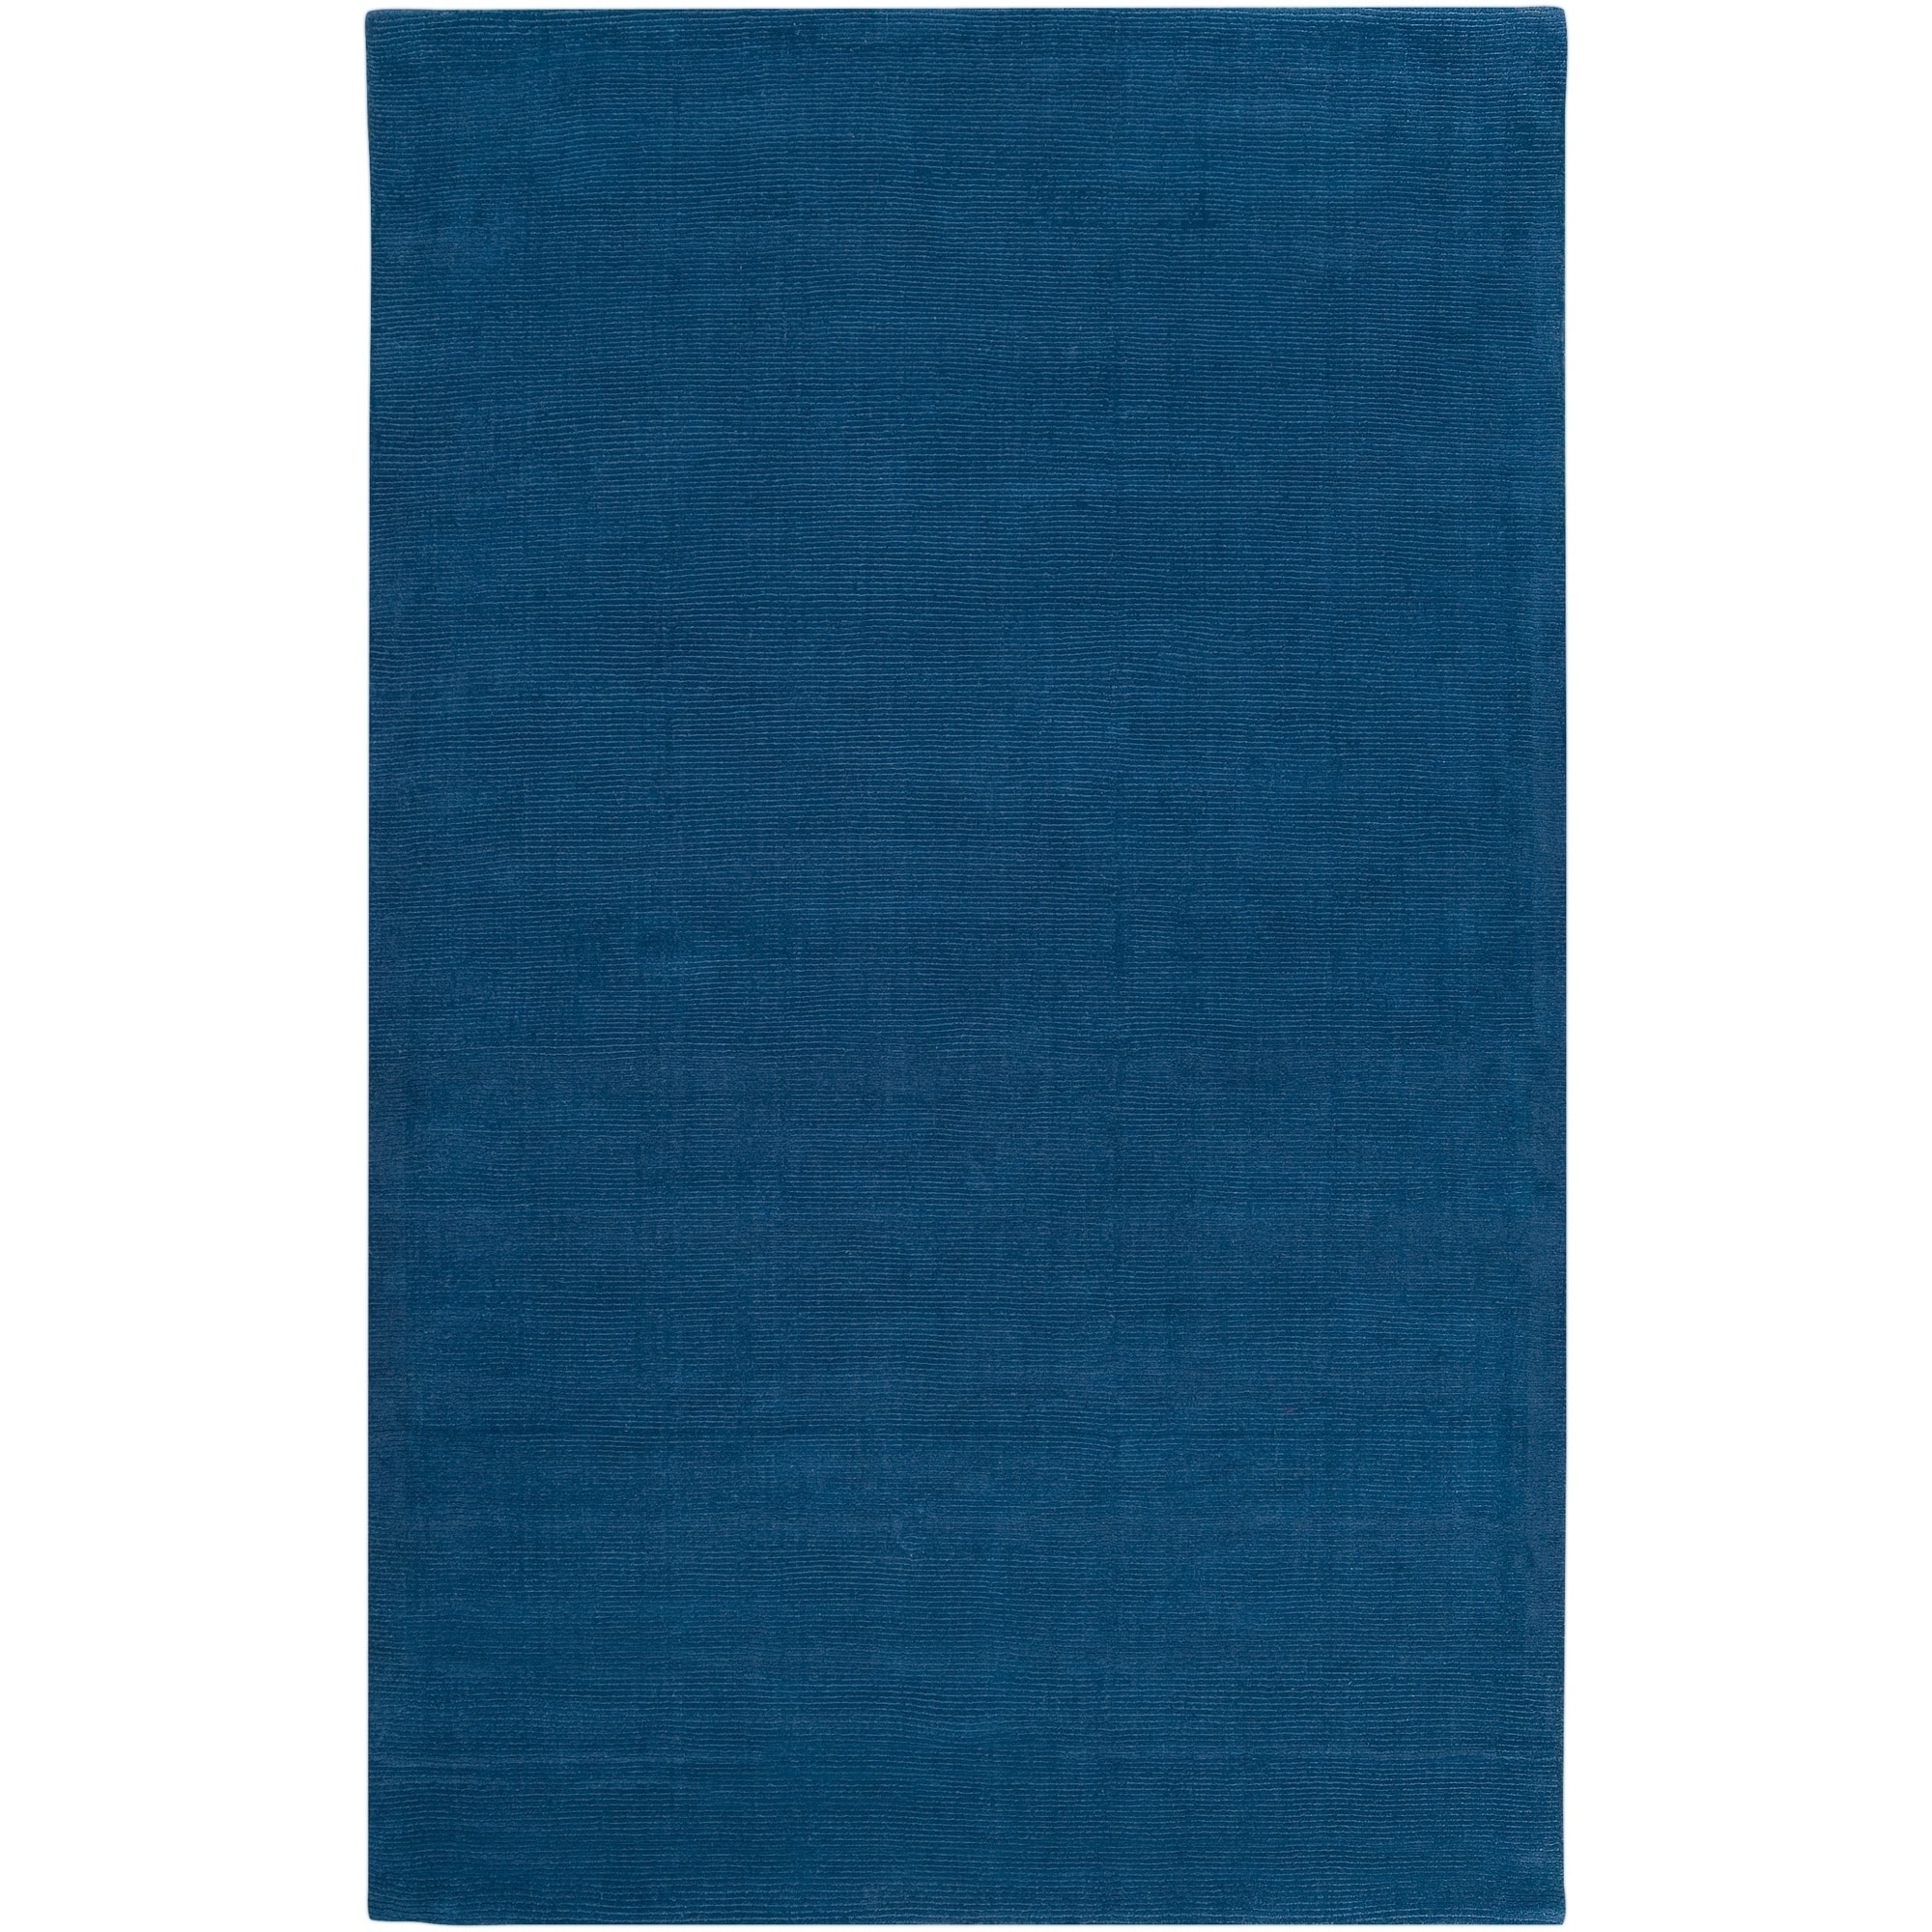 Hand crafted Solid Blue Causal Ridges Wool Rug (33 X 53)